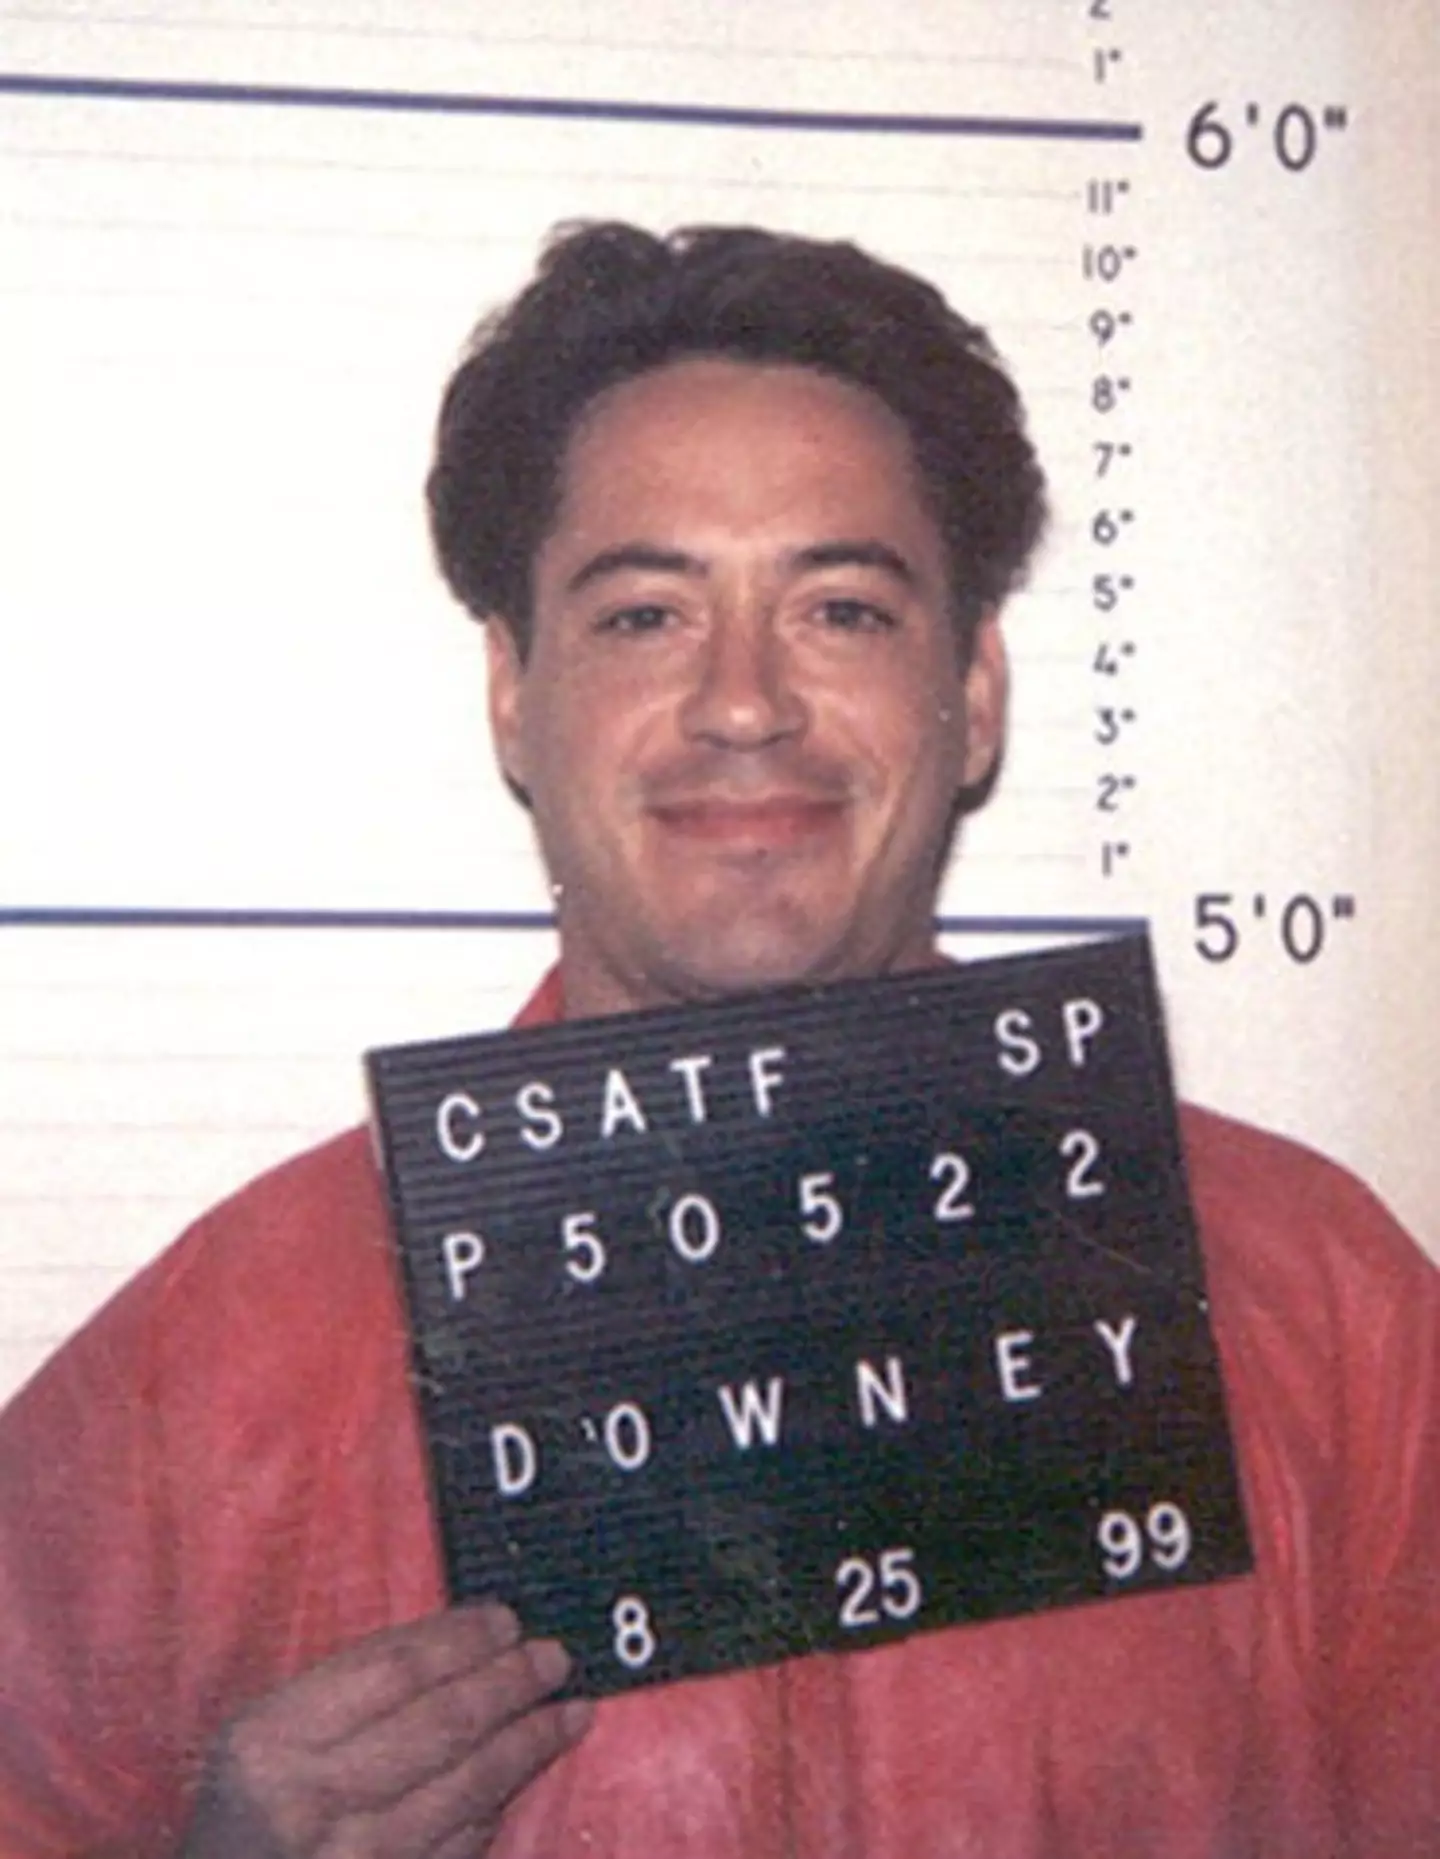 Robert Downey Jr.’s mugshot from his arrest in August 1999.